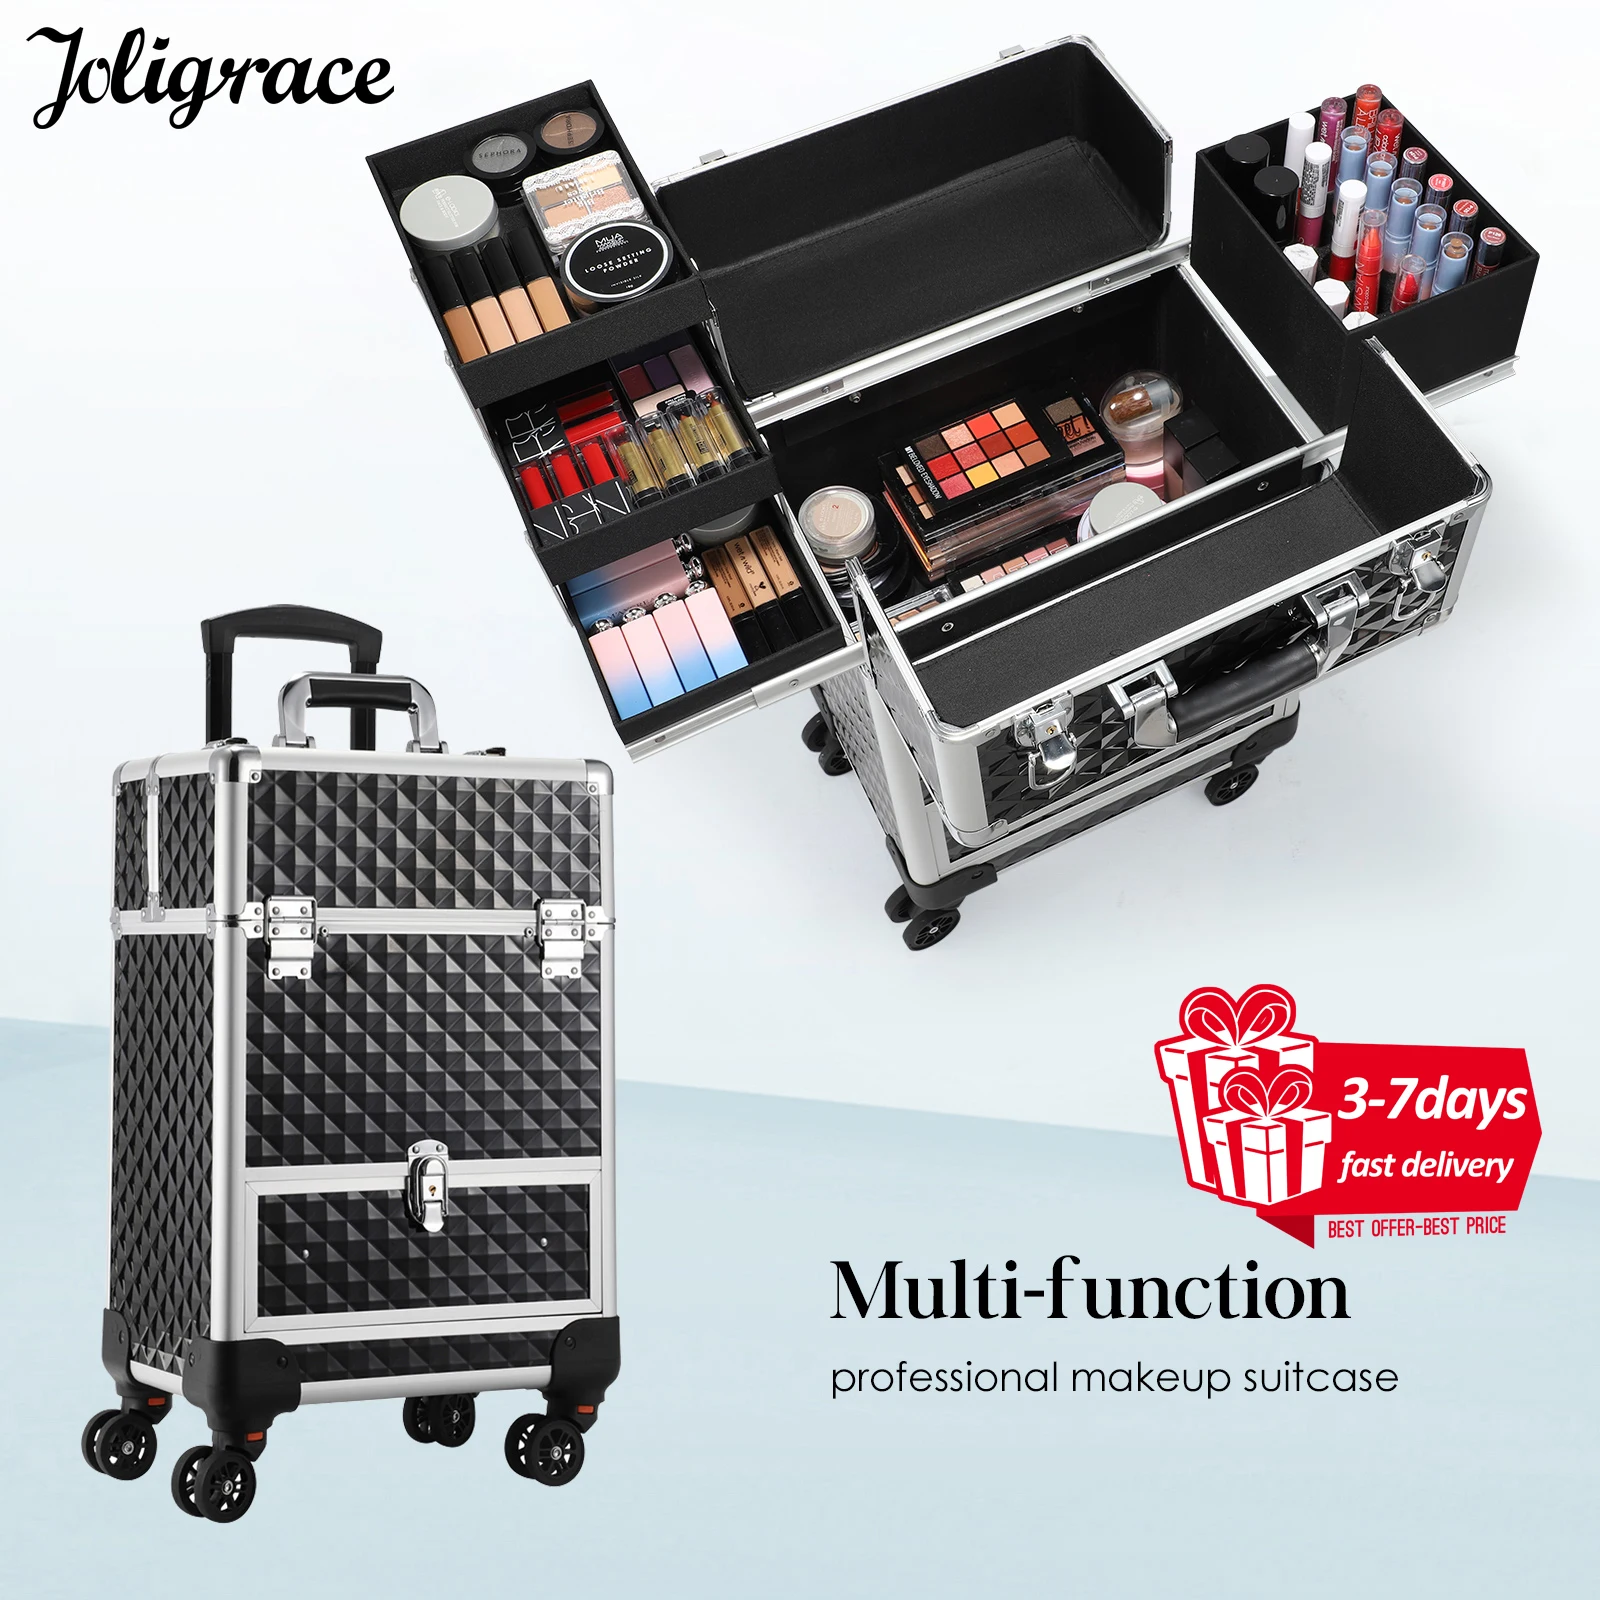 

Professional Makeup Suitcase with Wheels Large Storage Cosmetic Trolley with Slide Drawer Lock Rolling Make-up Case Nail Tech